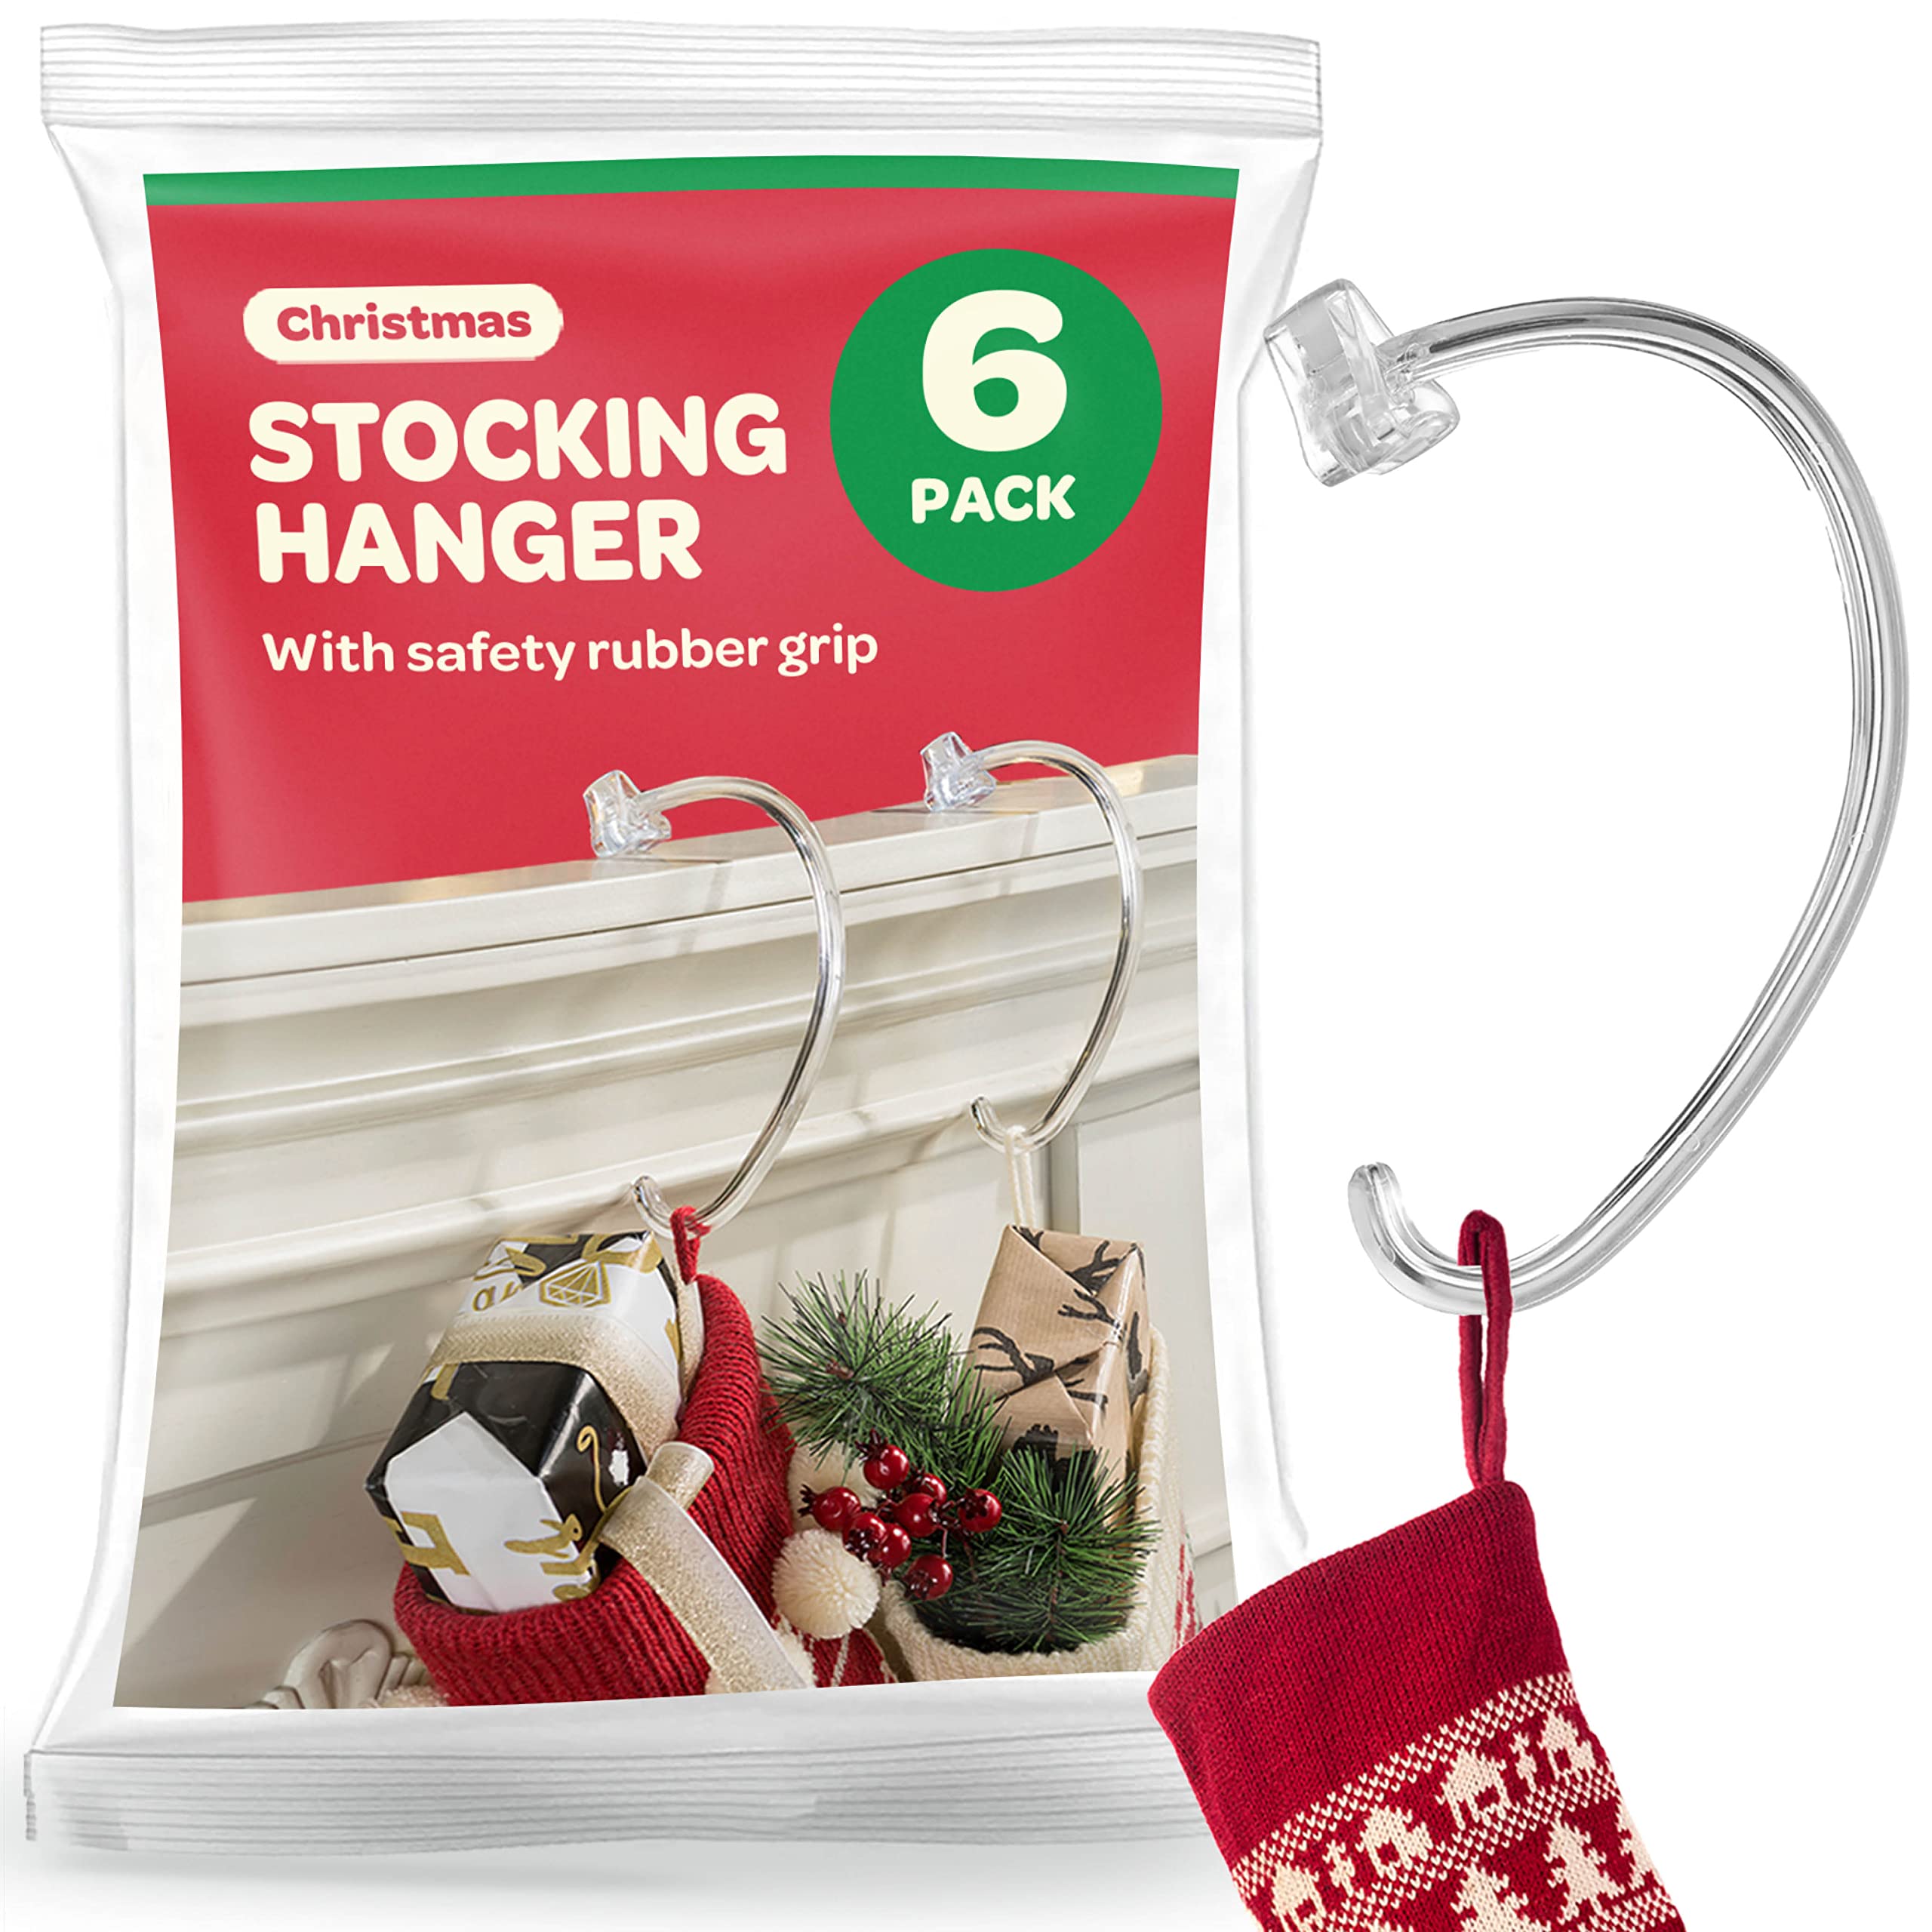 Christmas Stocking Holders For Mantle - [Set of 6] Stocking Hangers For Mantel - Safety Grip Stocking Hangers For Fireplace, Mantle Stocking Hanger - Safety-Grip - Made in the USA - No Tools Required